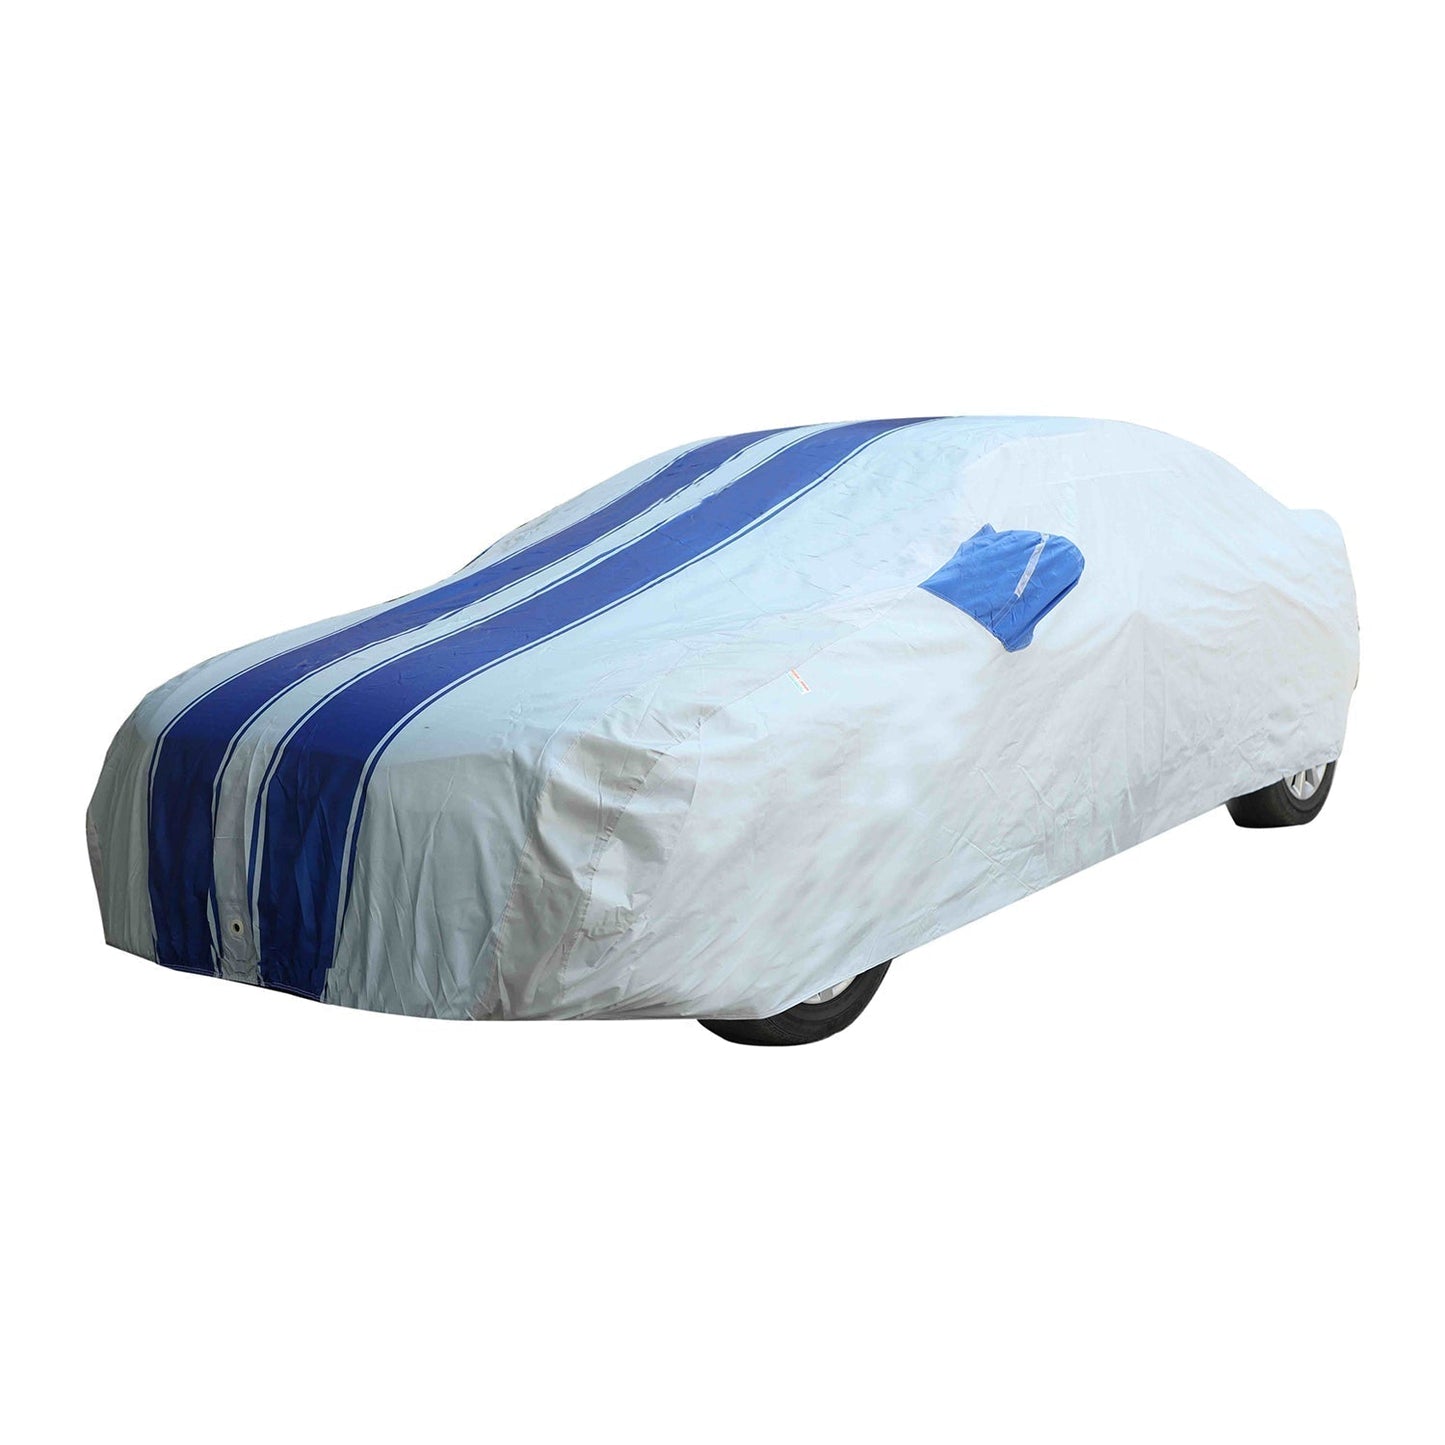 Oshotto 100% Blue dustproof and Water Resistant Car Body Cover with Mirror Pockets For Tata Safari/Storm